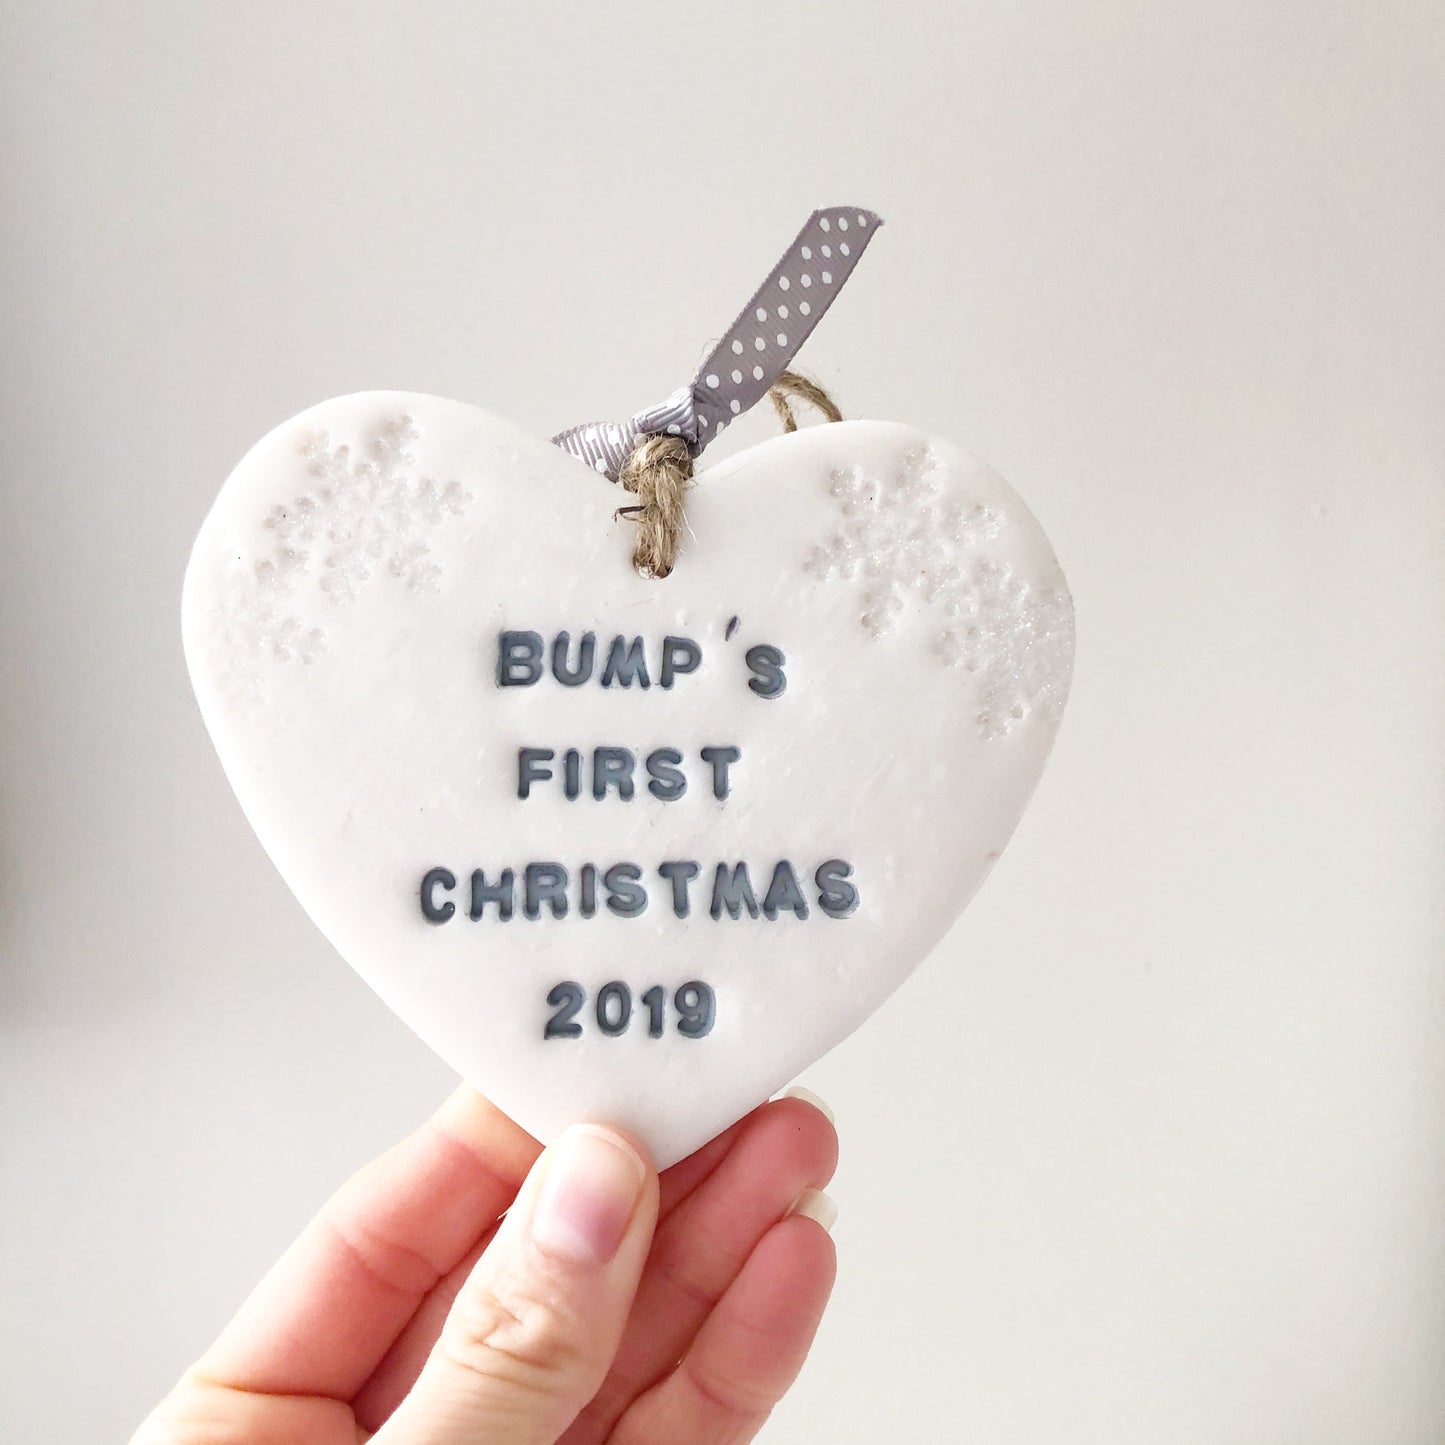 Personalised bump's first Christmas heart ornament, pearlised white clay with BUMP'S FIRST CHRISTMAS 2019 painted grey, decorated with 2 iridescent glitter snowflakes on either side of the top of the heart